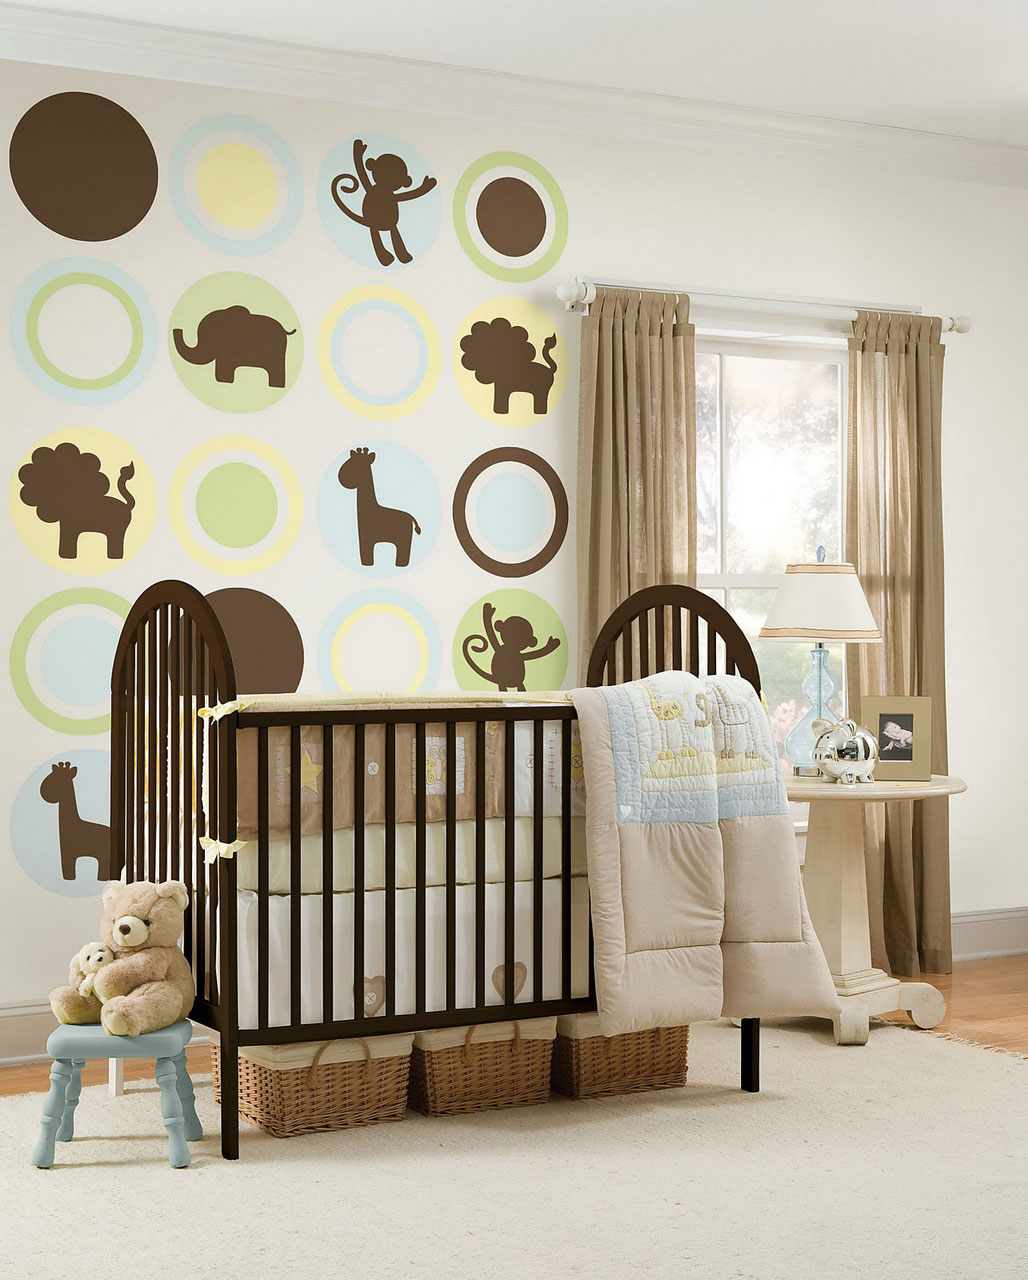 Dream Nursery for Your Baby | My Decorative